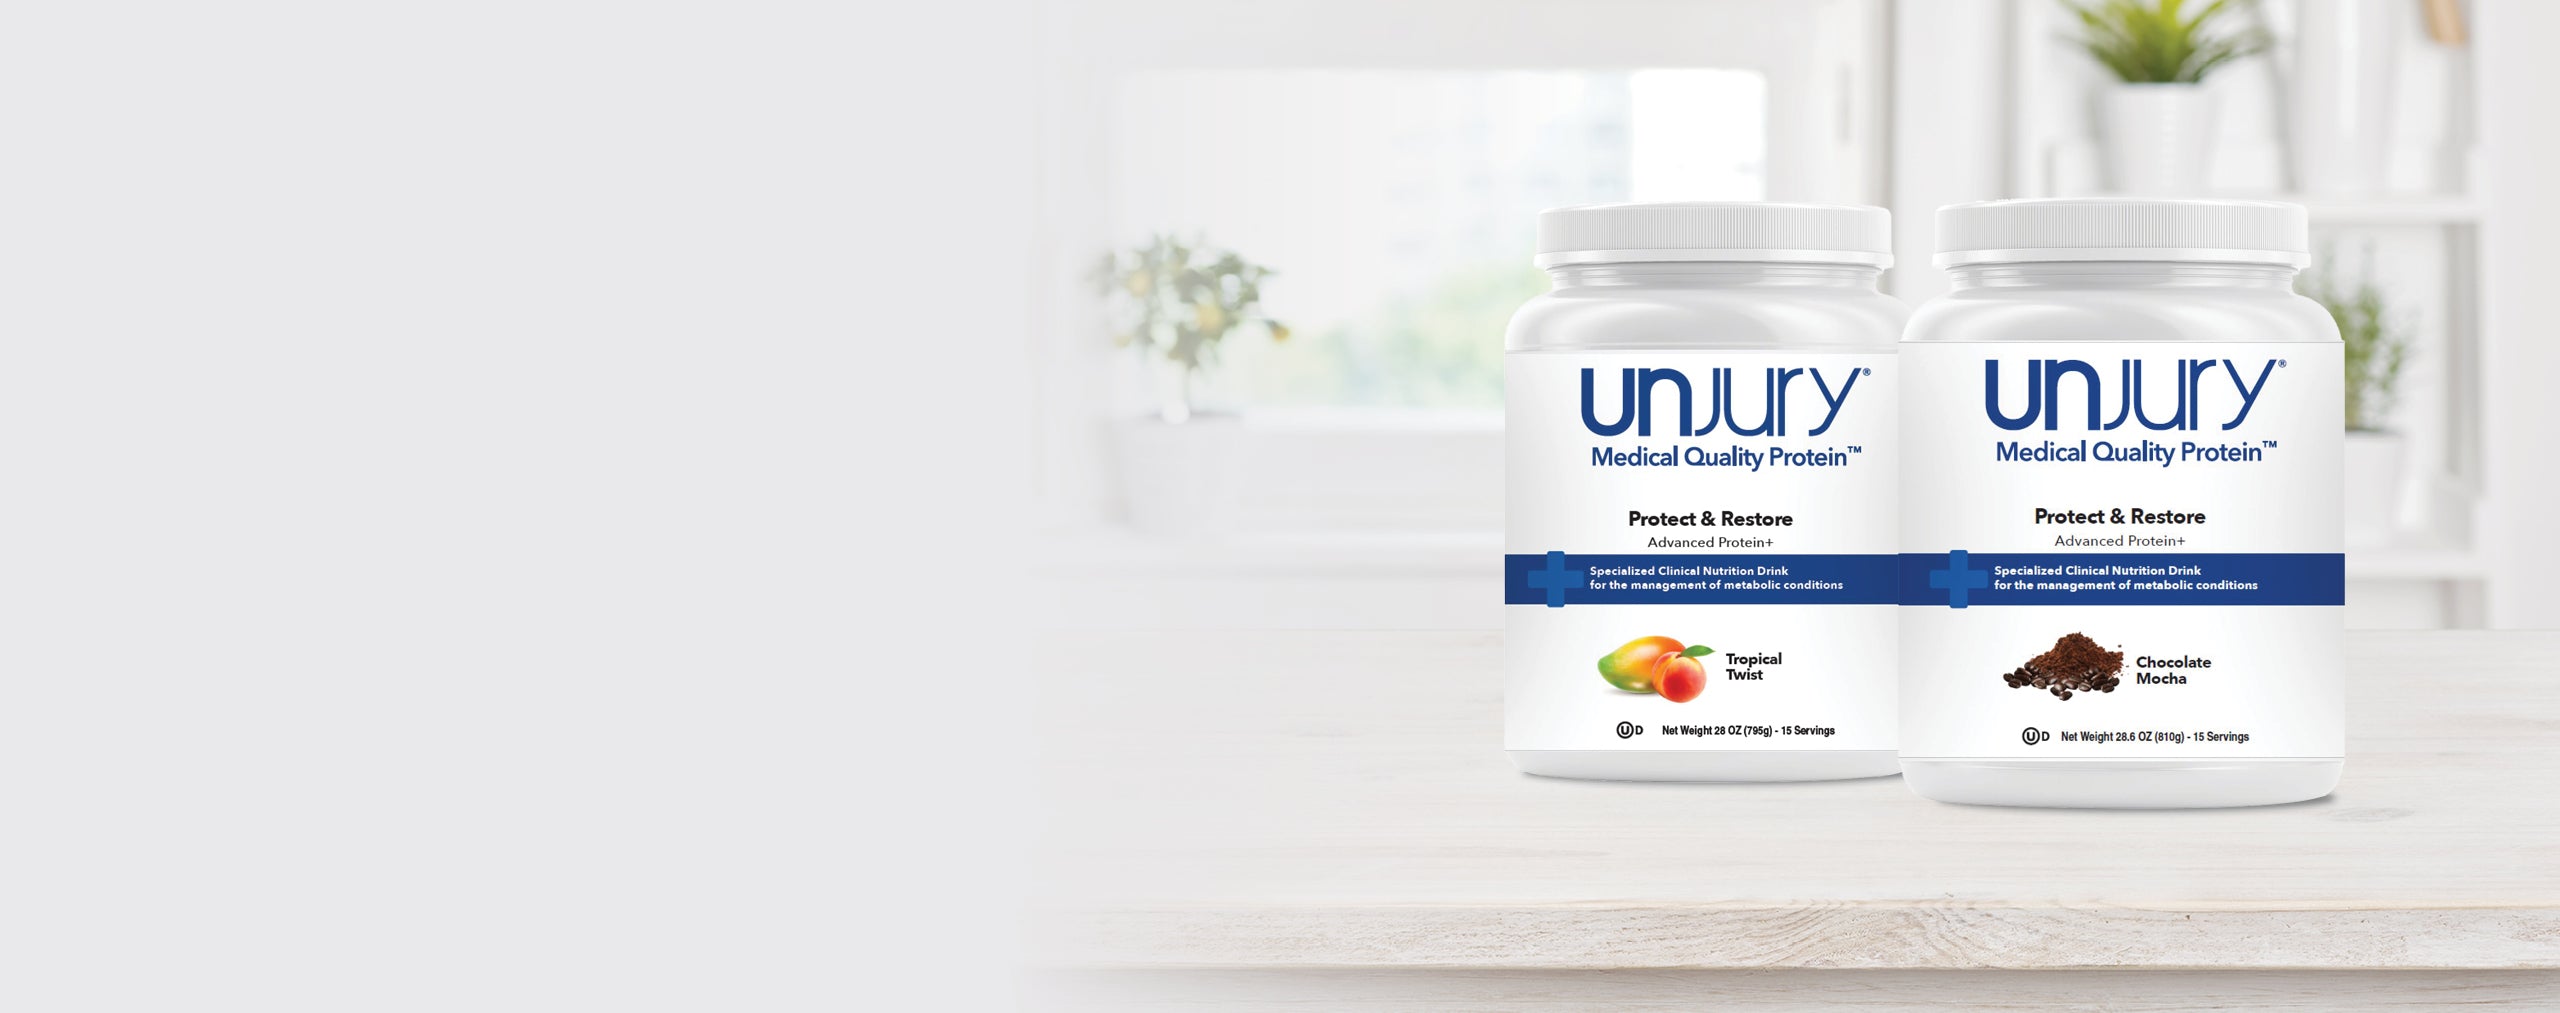 New Product: Unjury Protect & Restore Advanced Protein+